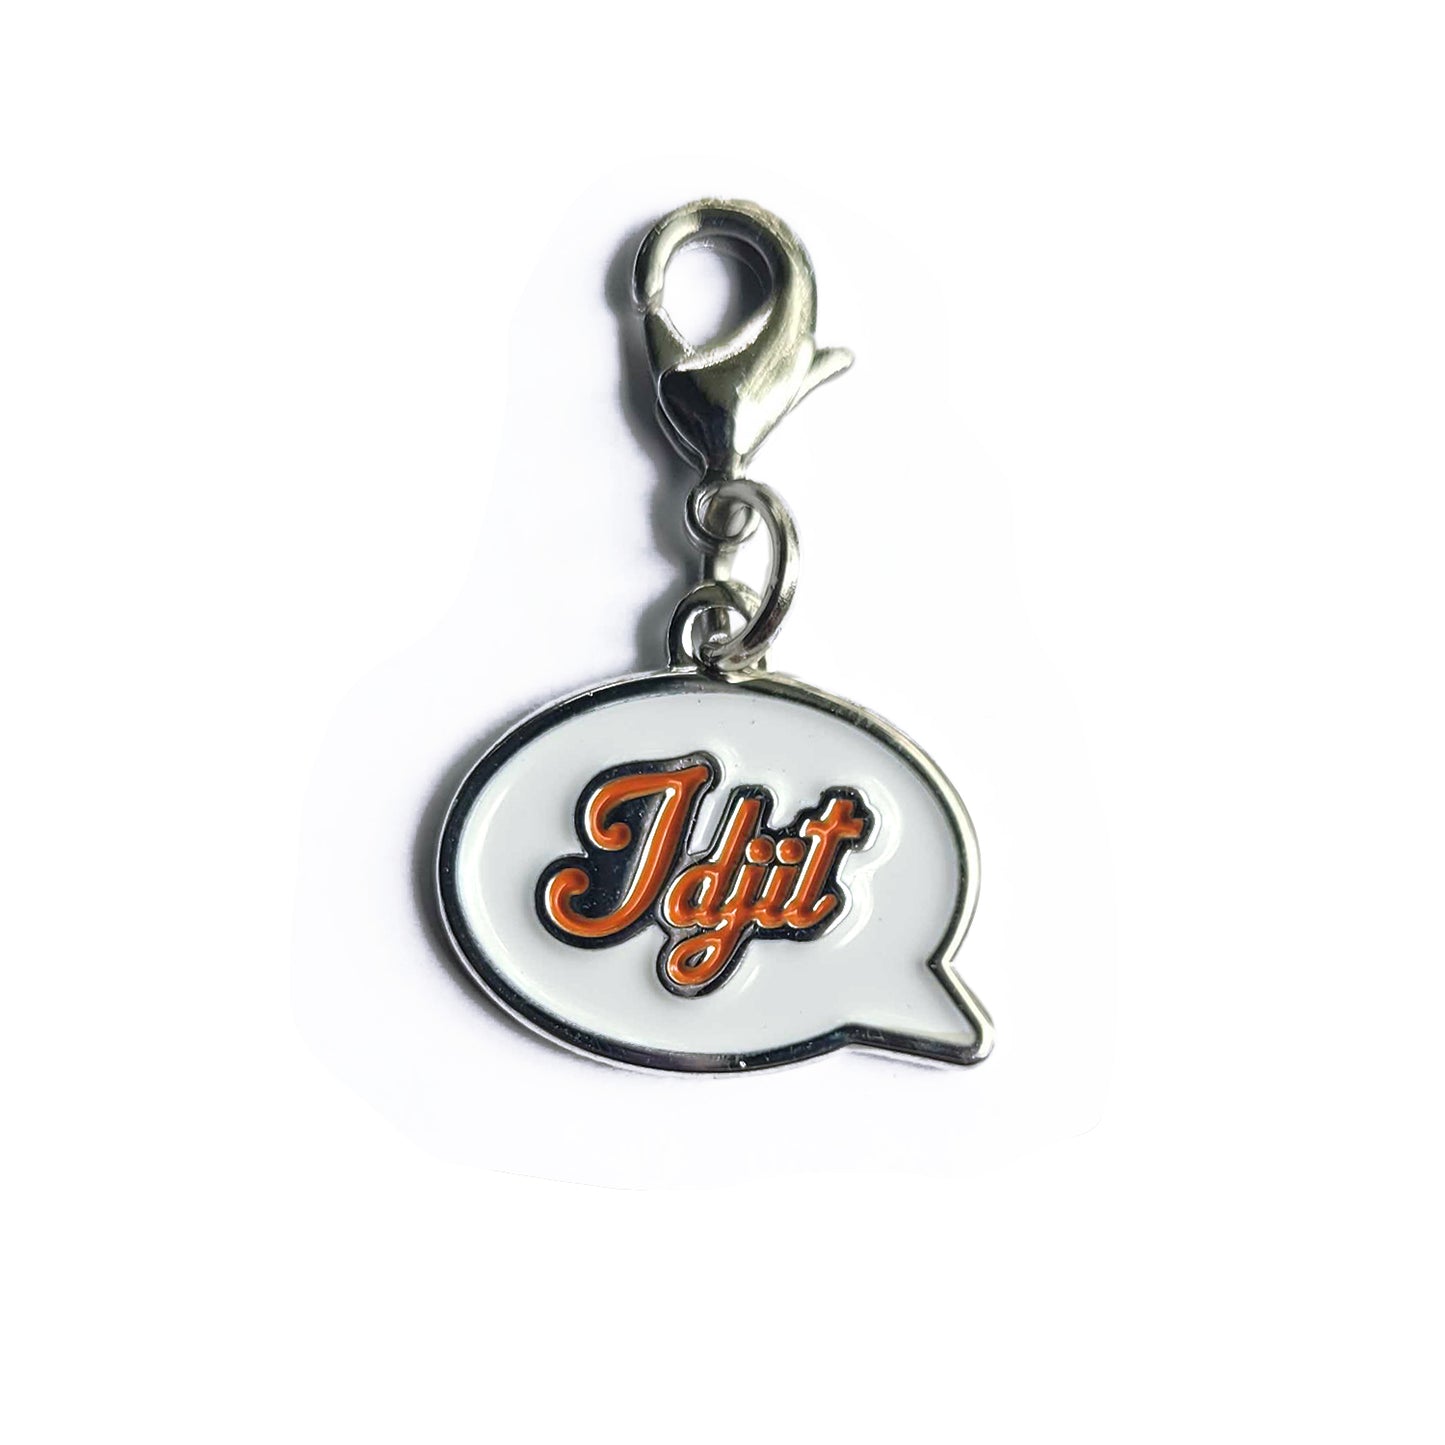 A silver charm with a keychain clasp with a white front in the shape of a speech bubble. The word "Idjit" is written in orange script font.